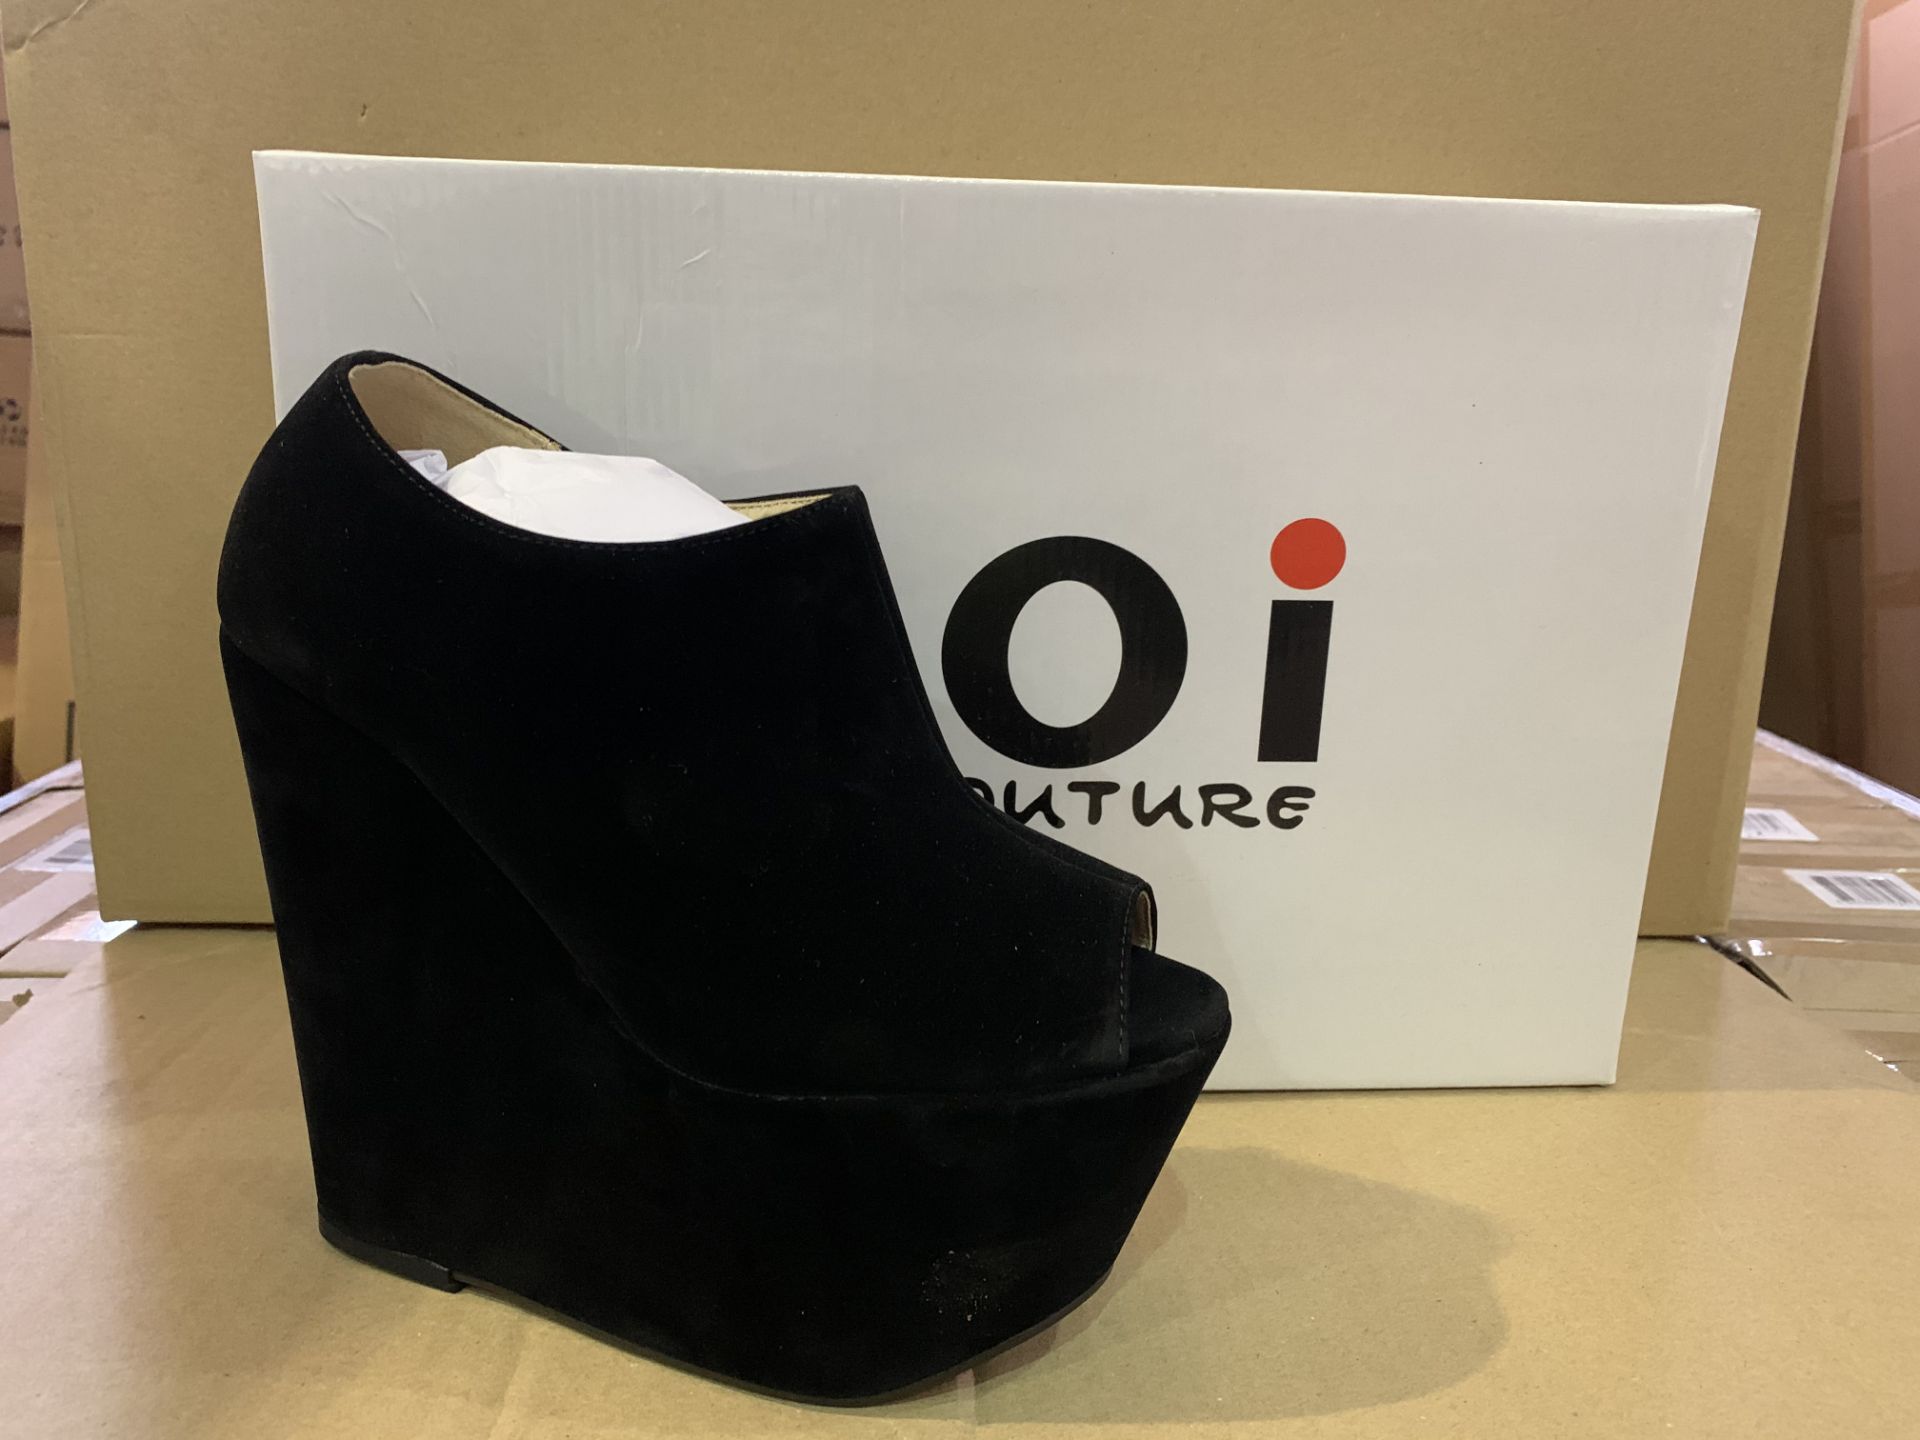 14 X BRAND NEW RETAIL BOXED KOI COUTURE BLACK SUEDE HIGH HEEL SHOES IN RATIO BOX (1 X SIZE 3, 3 X